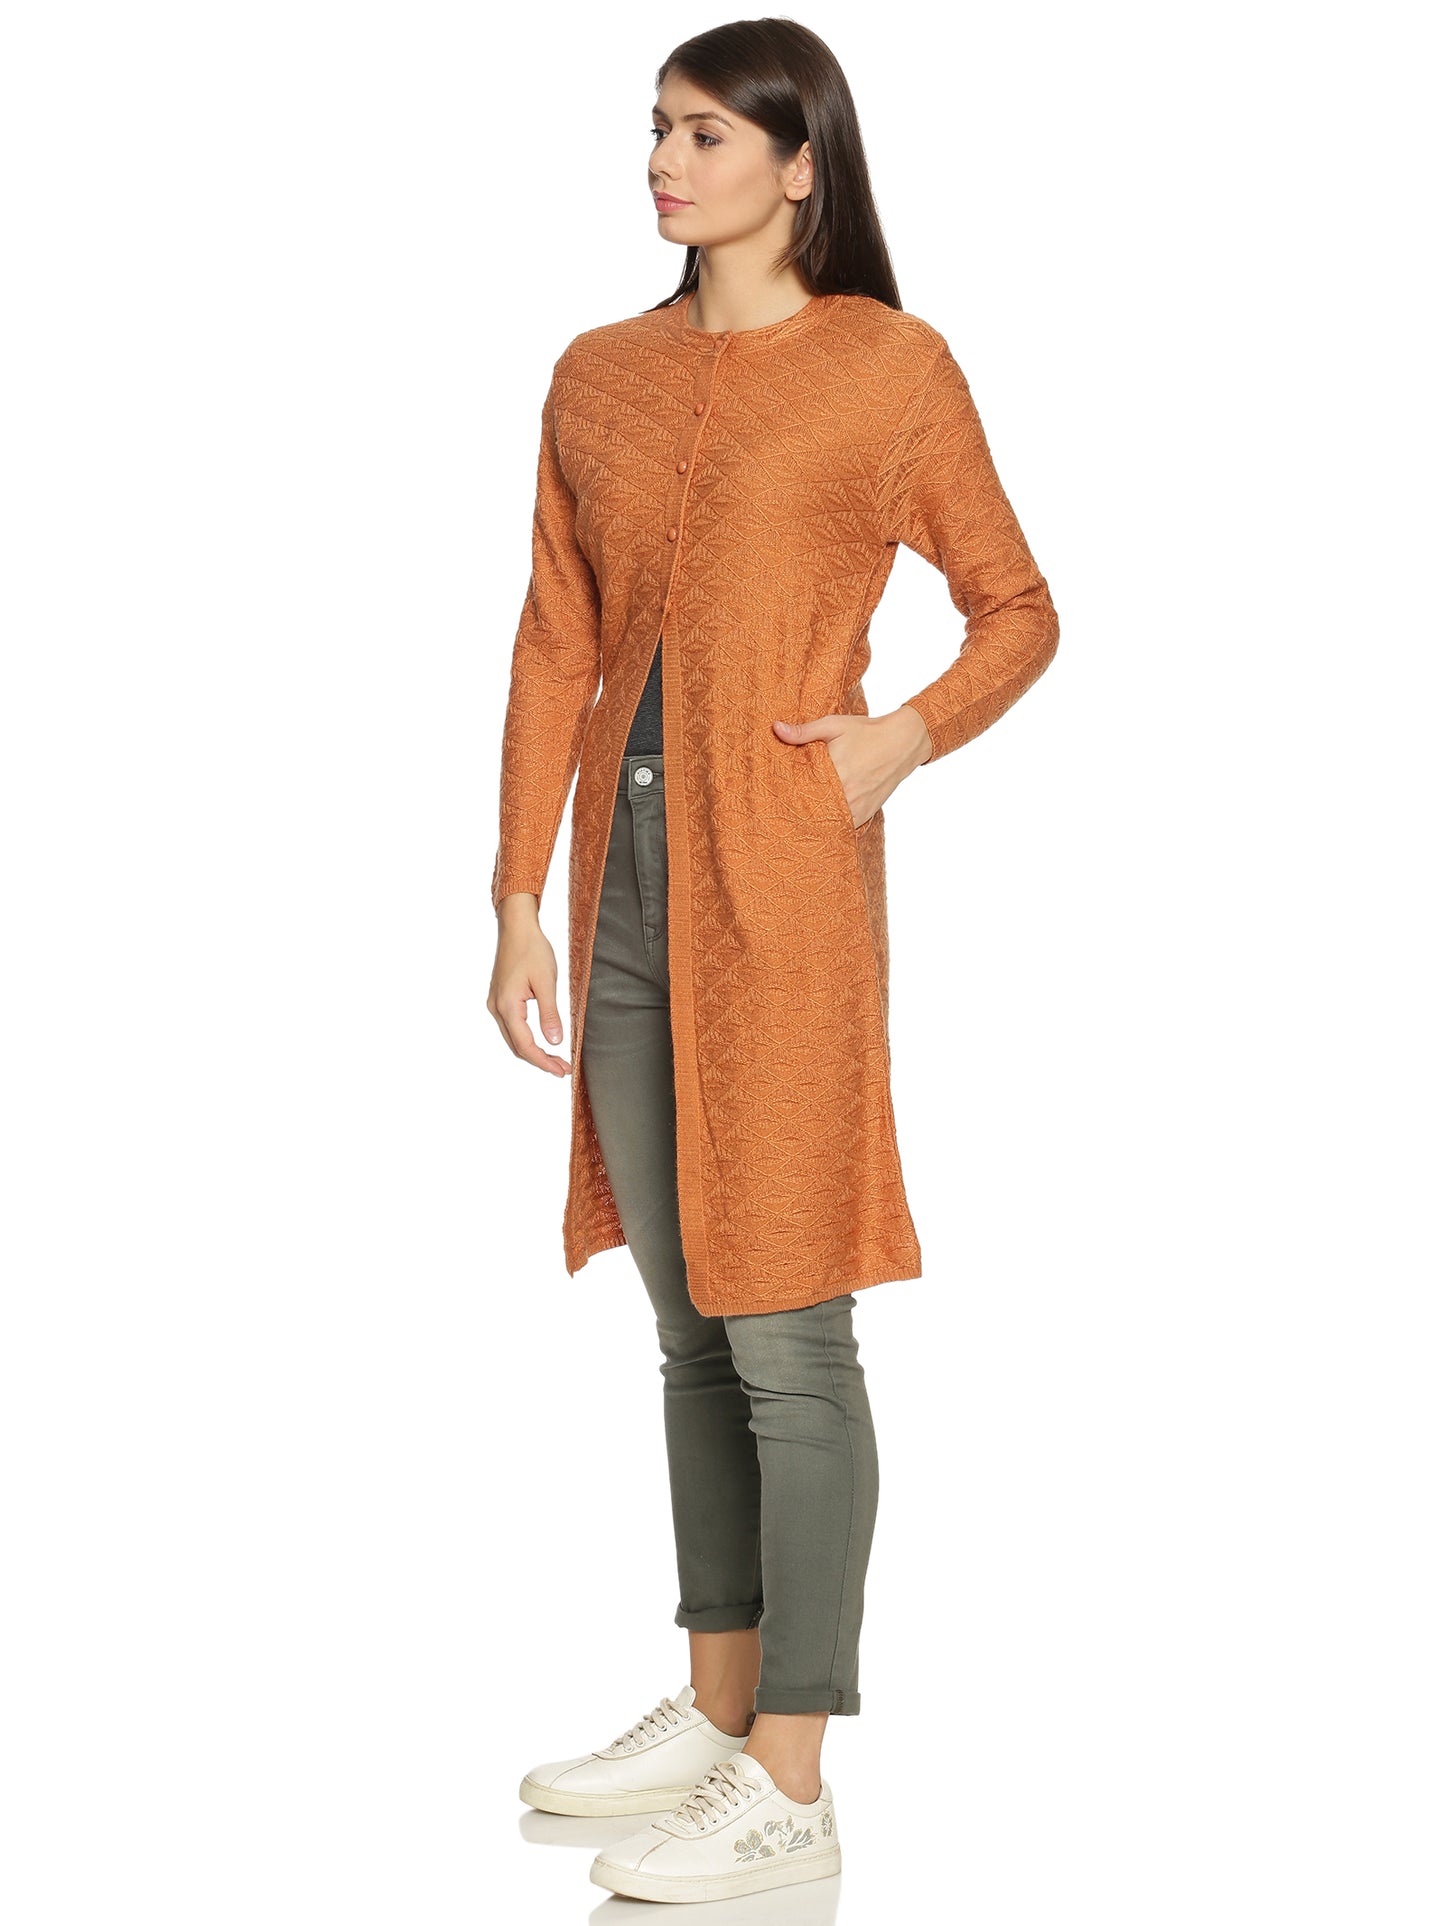 Clapton Acrylic Blend Round Neck Full Sleeve Casual Solid Winter Wear Cardigans For Women Saffron